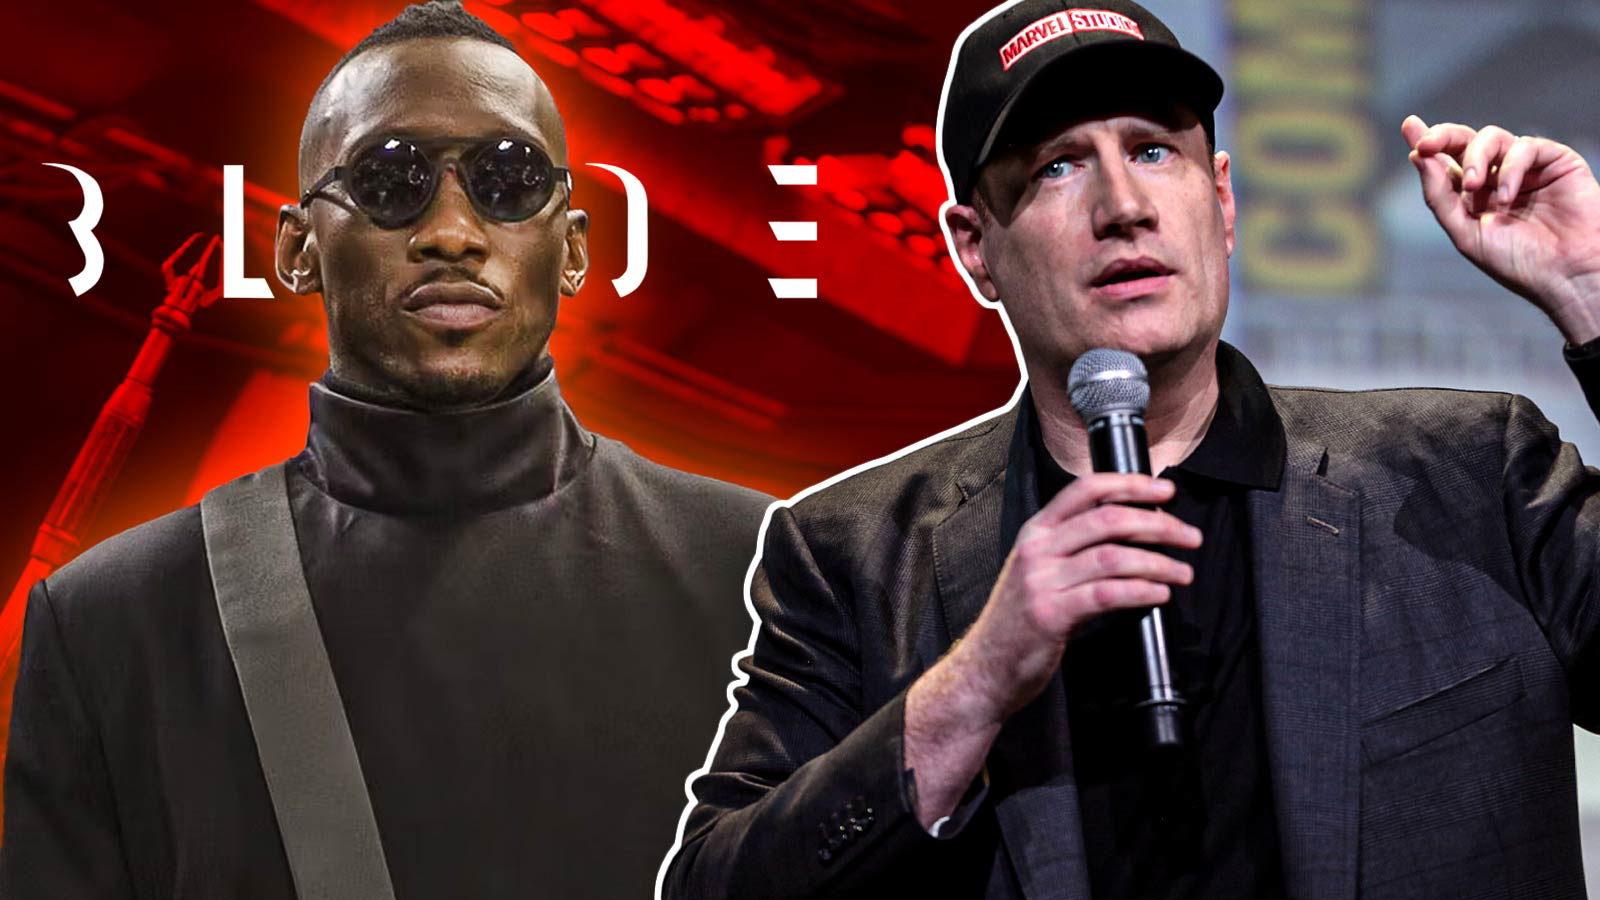 “Can’t wait for it to come out in 2054!”: Mahershala Ali’s ‘Blade’ Gets Trolled and Humiliated as Kevin Feige’s Update Fails to Restore Faith in the MCU Film